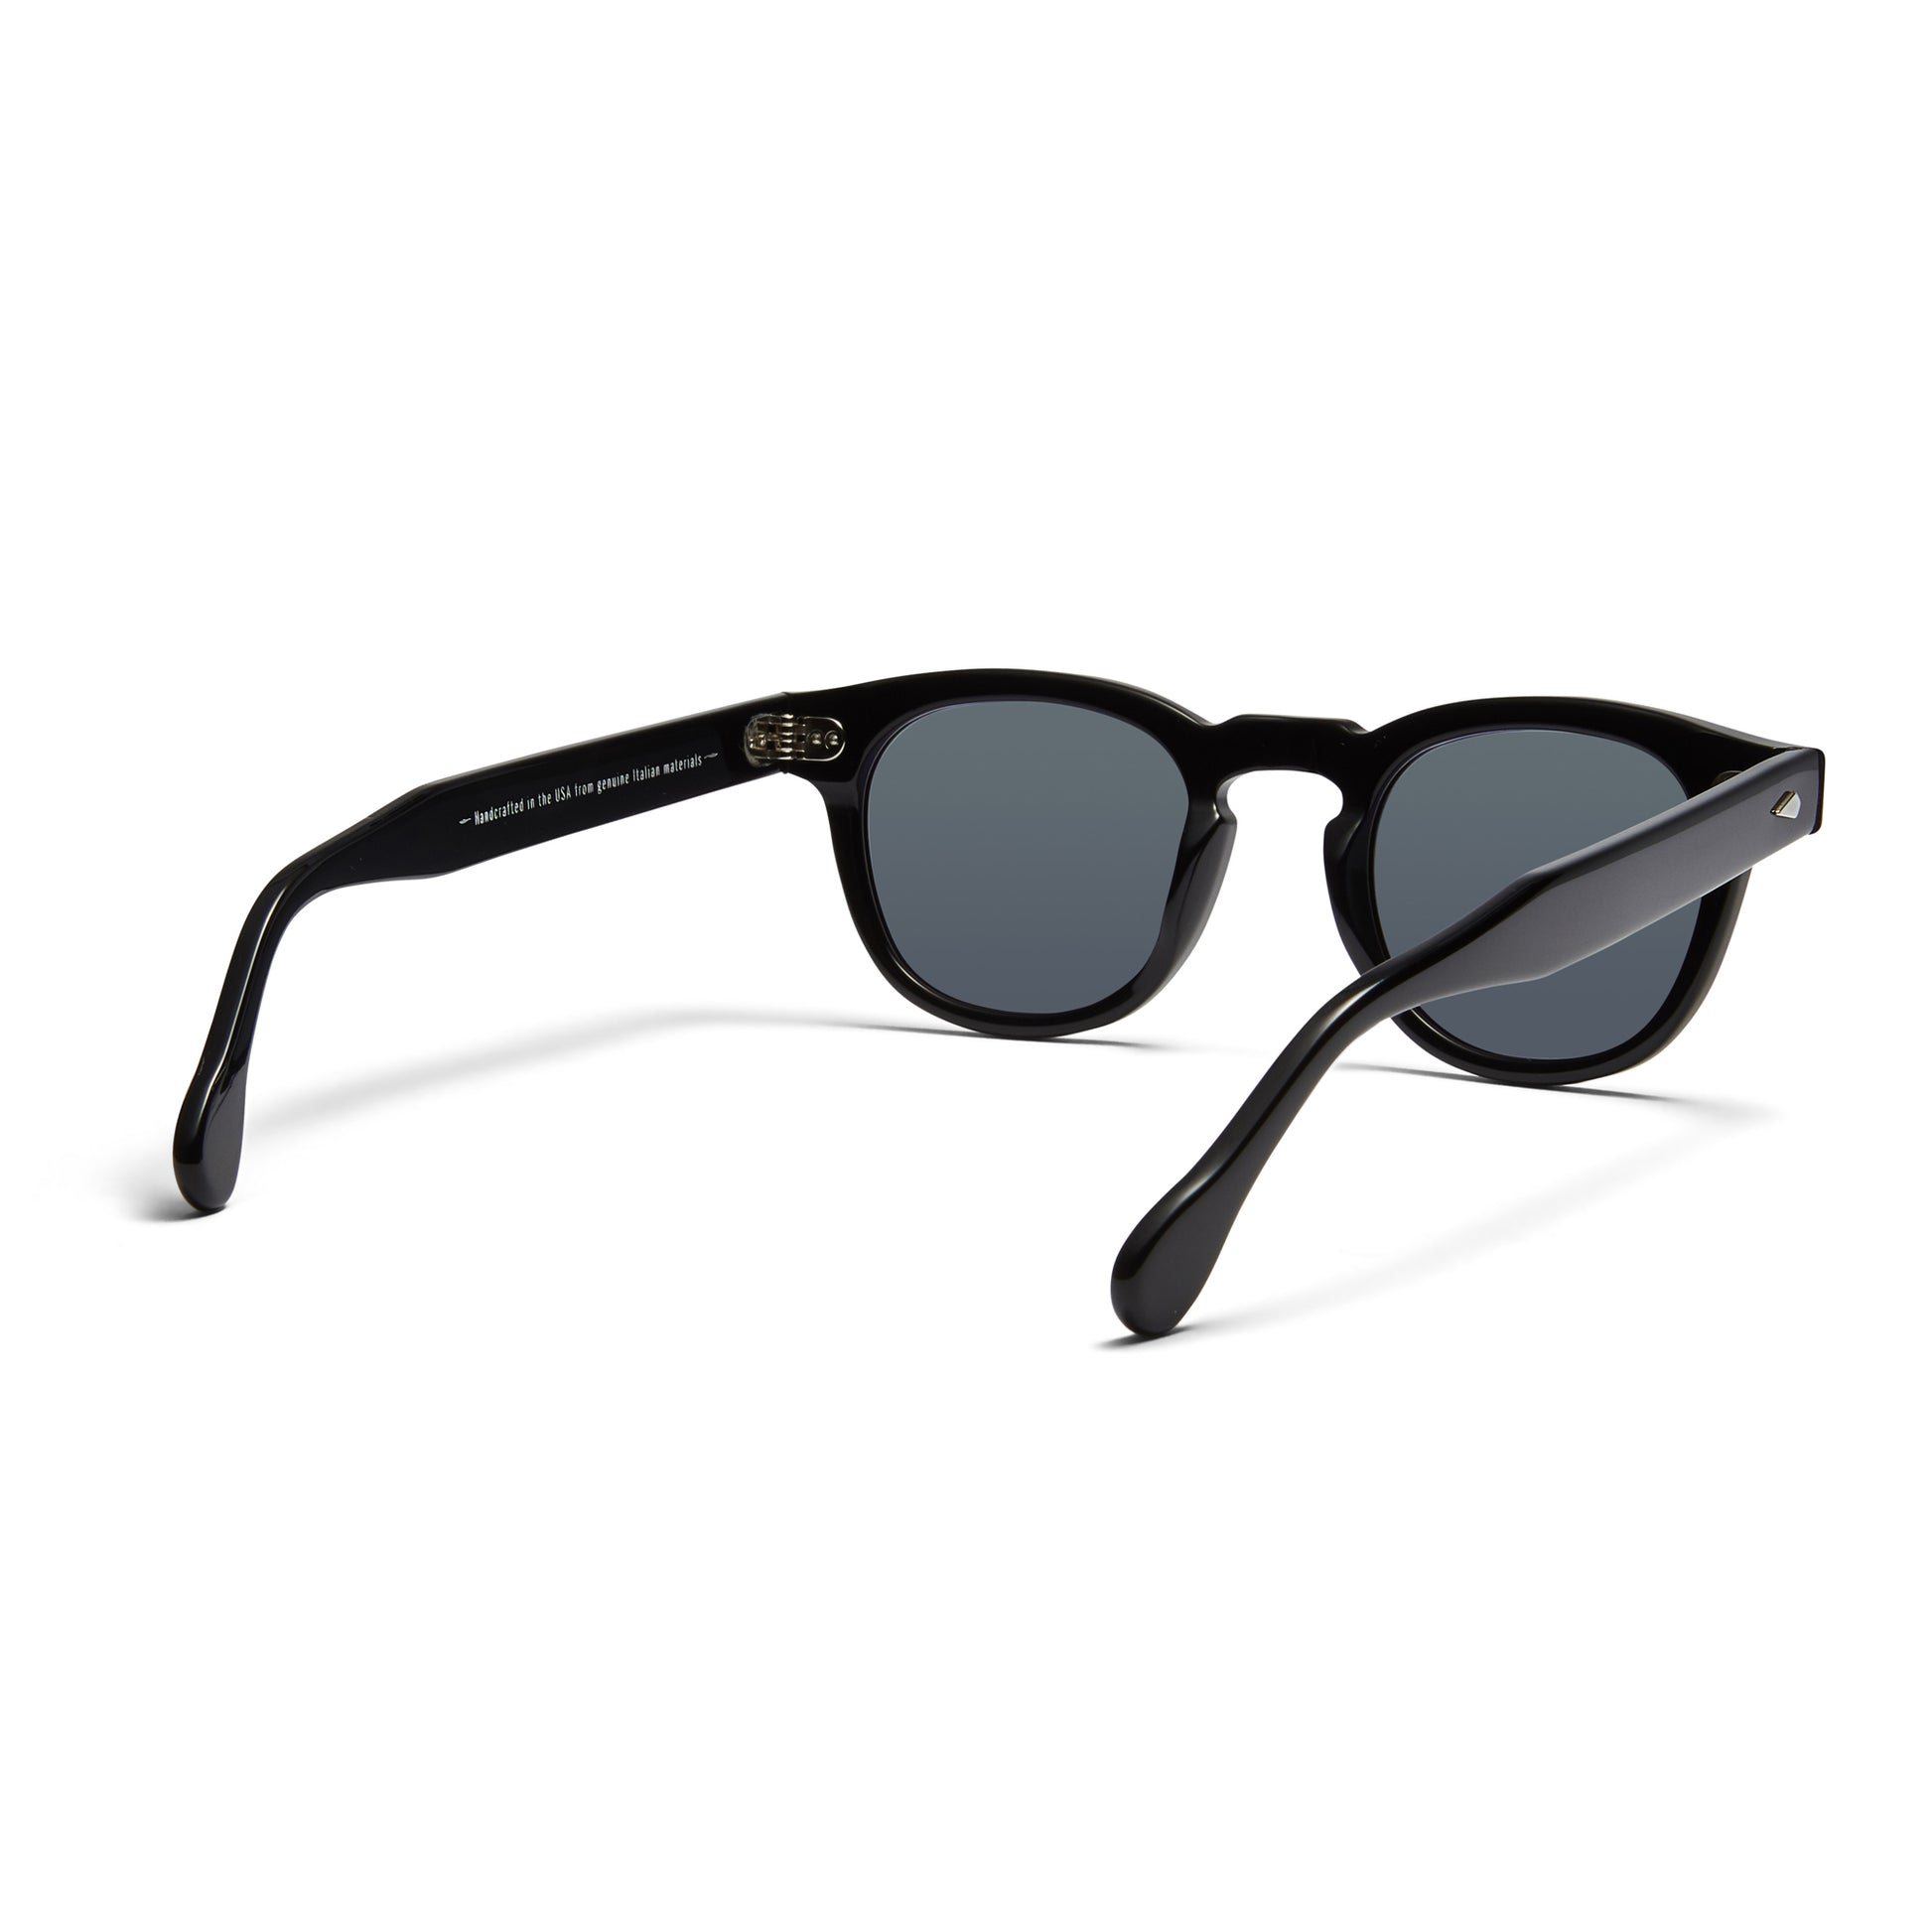 A back view of the glossy black Arnel USA sunglass frame—the Vintage eyewear. 